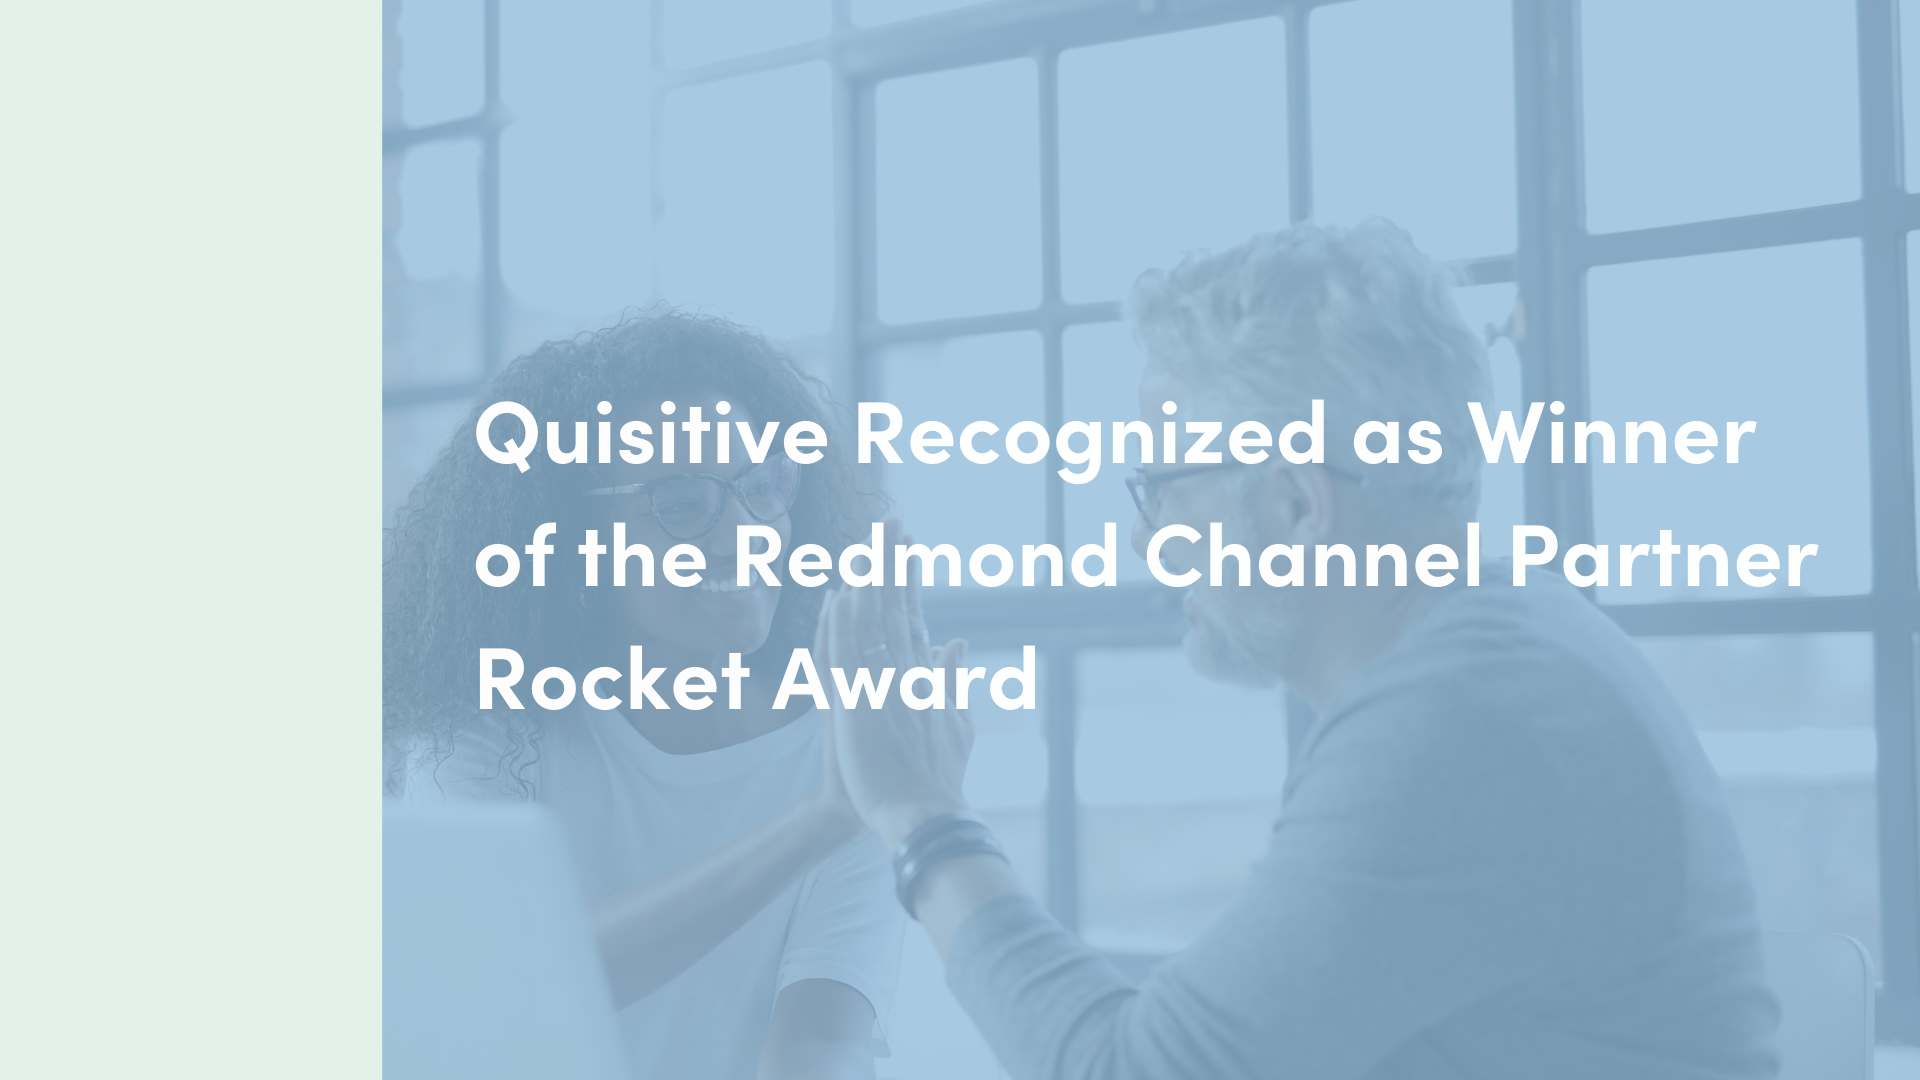 Man and woman high fiving with text overlay that reads Quisitive Recognized as Winner of Redmond Channel Partner Rocket Award